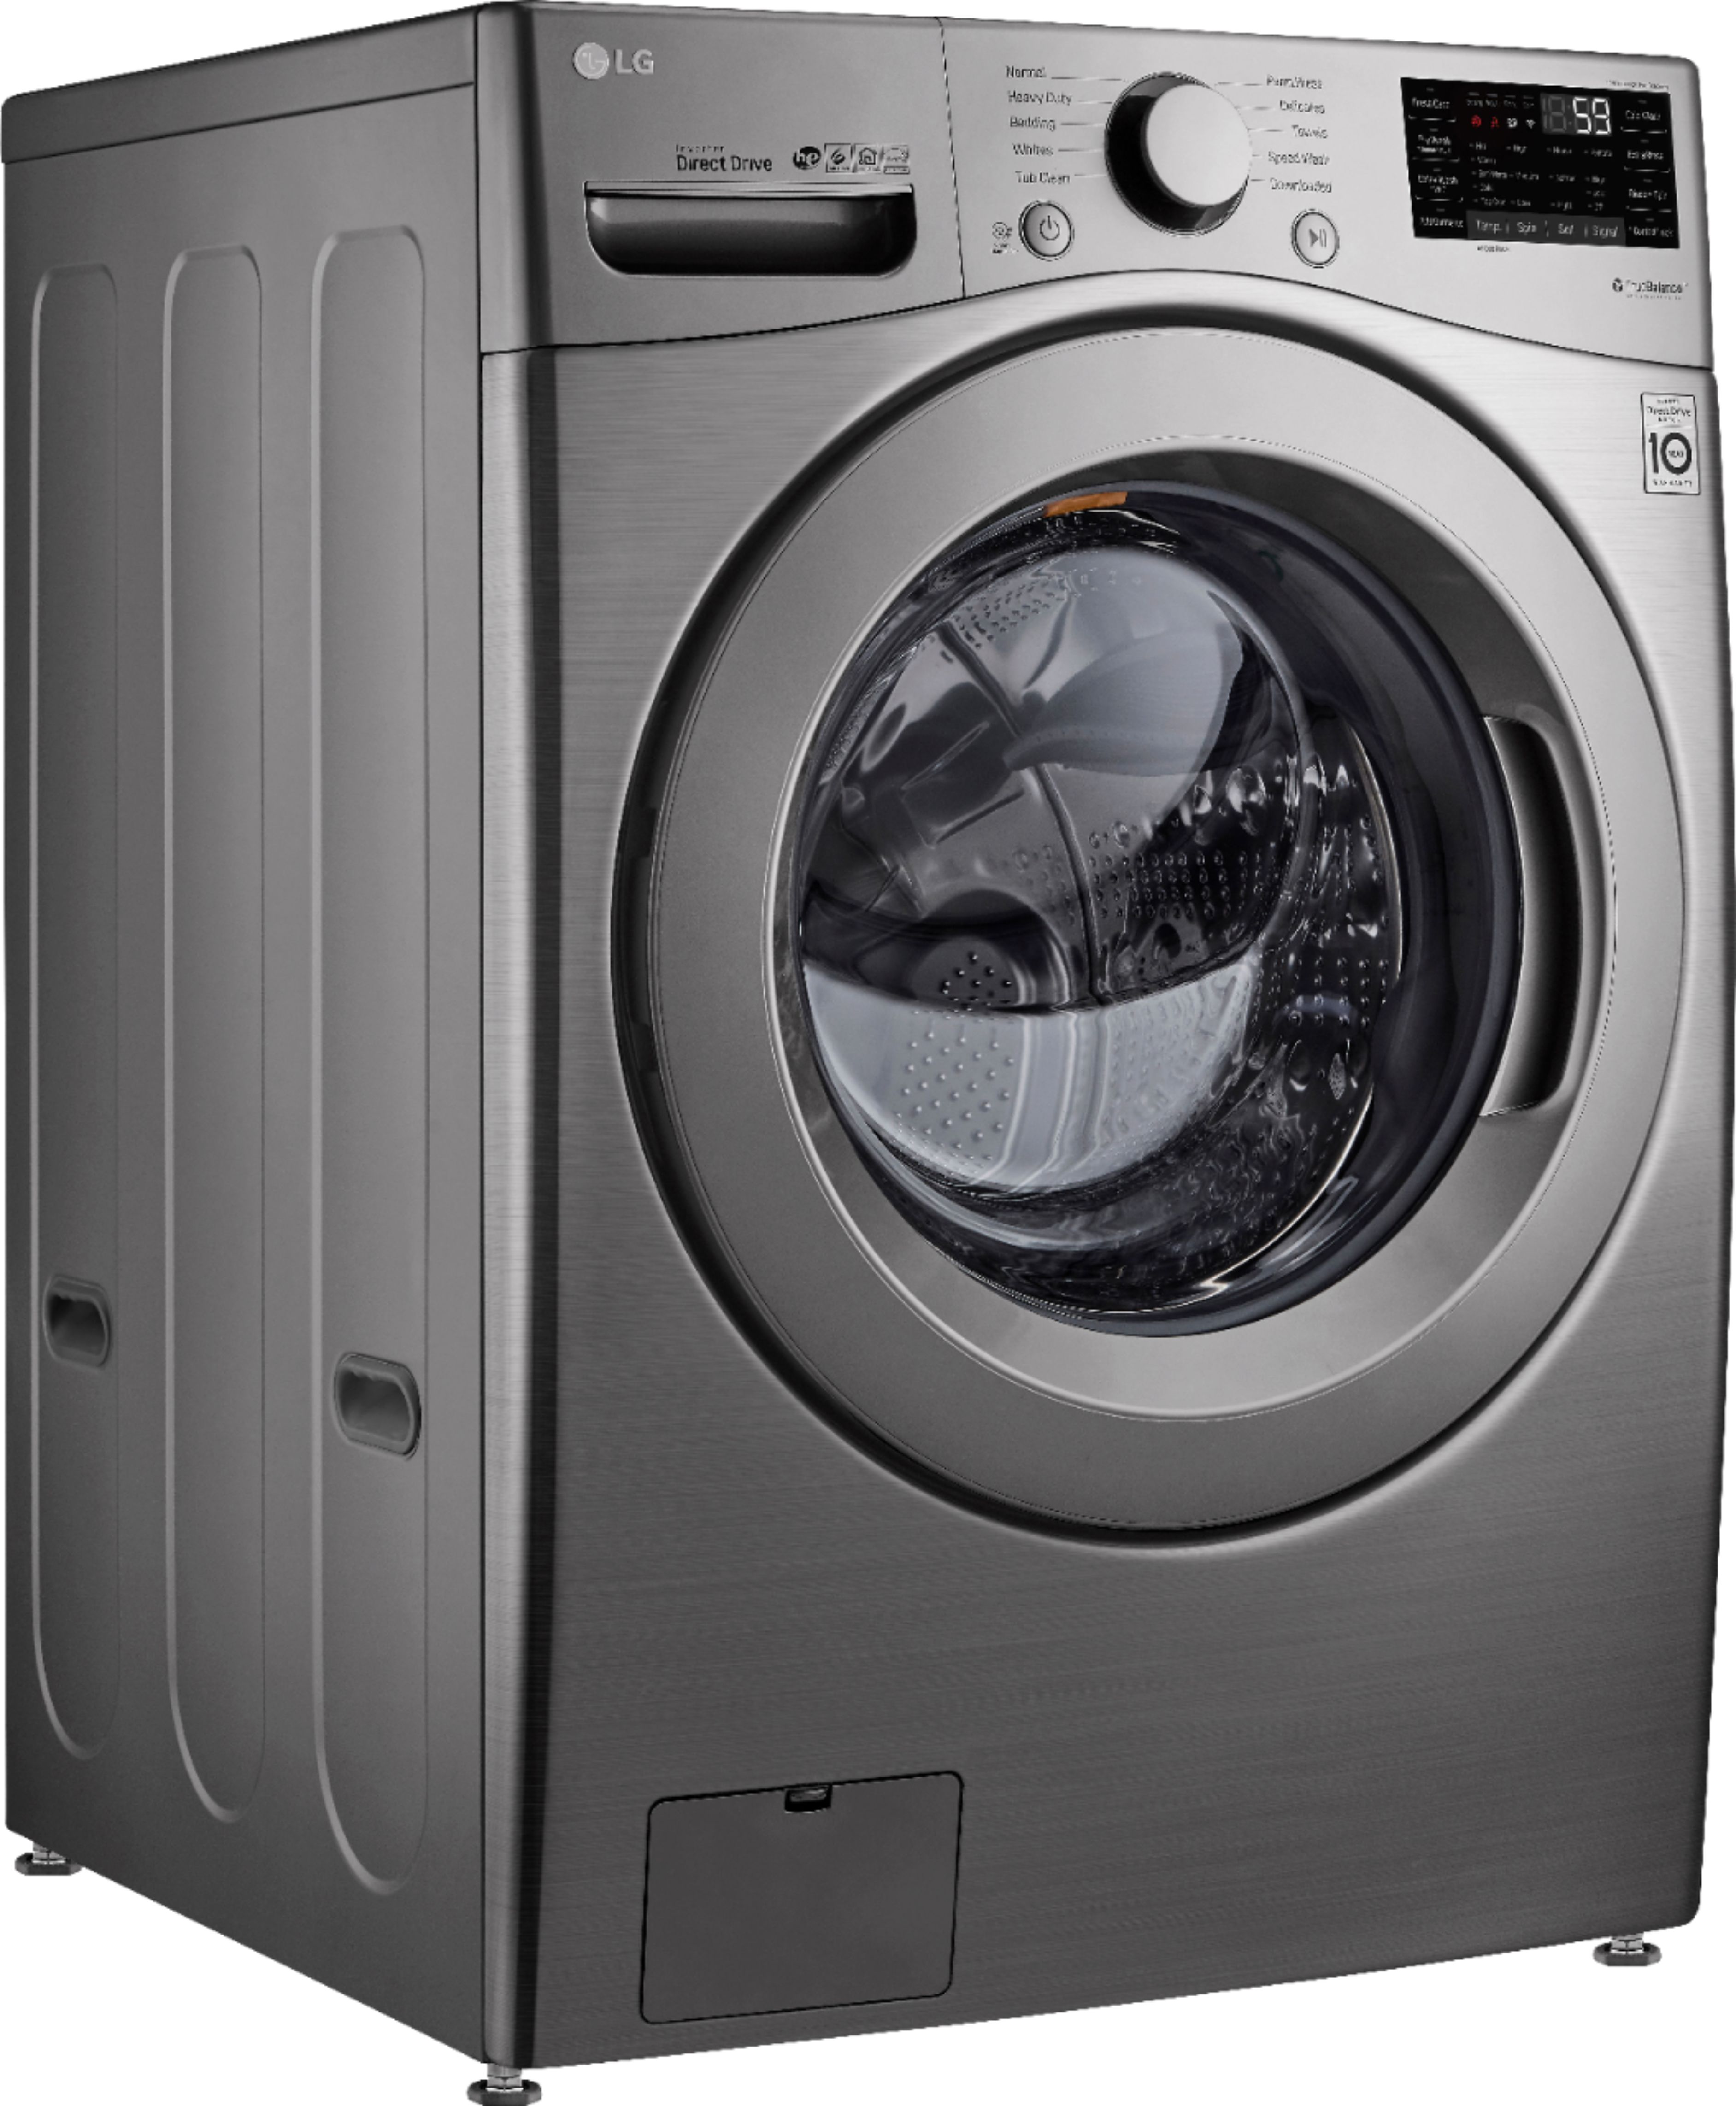 Angle View: LG - 4.5 Cu. Ft. 10-Cycle High-Efficiency Front-Loading Washer with 6Motion Technology - Graphite steel